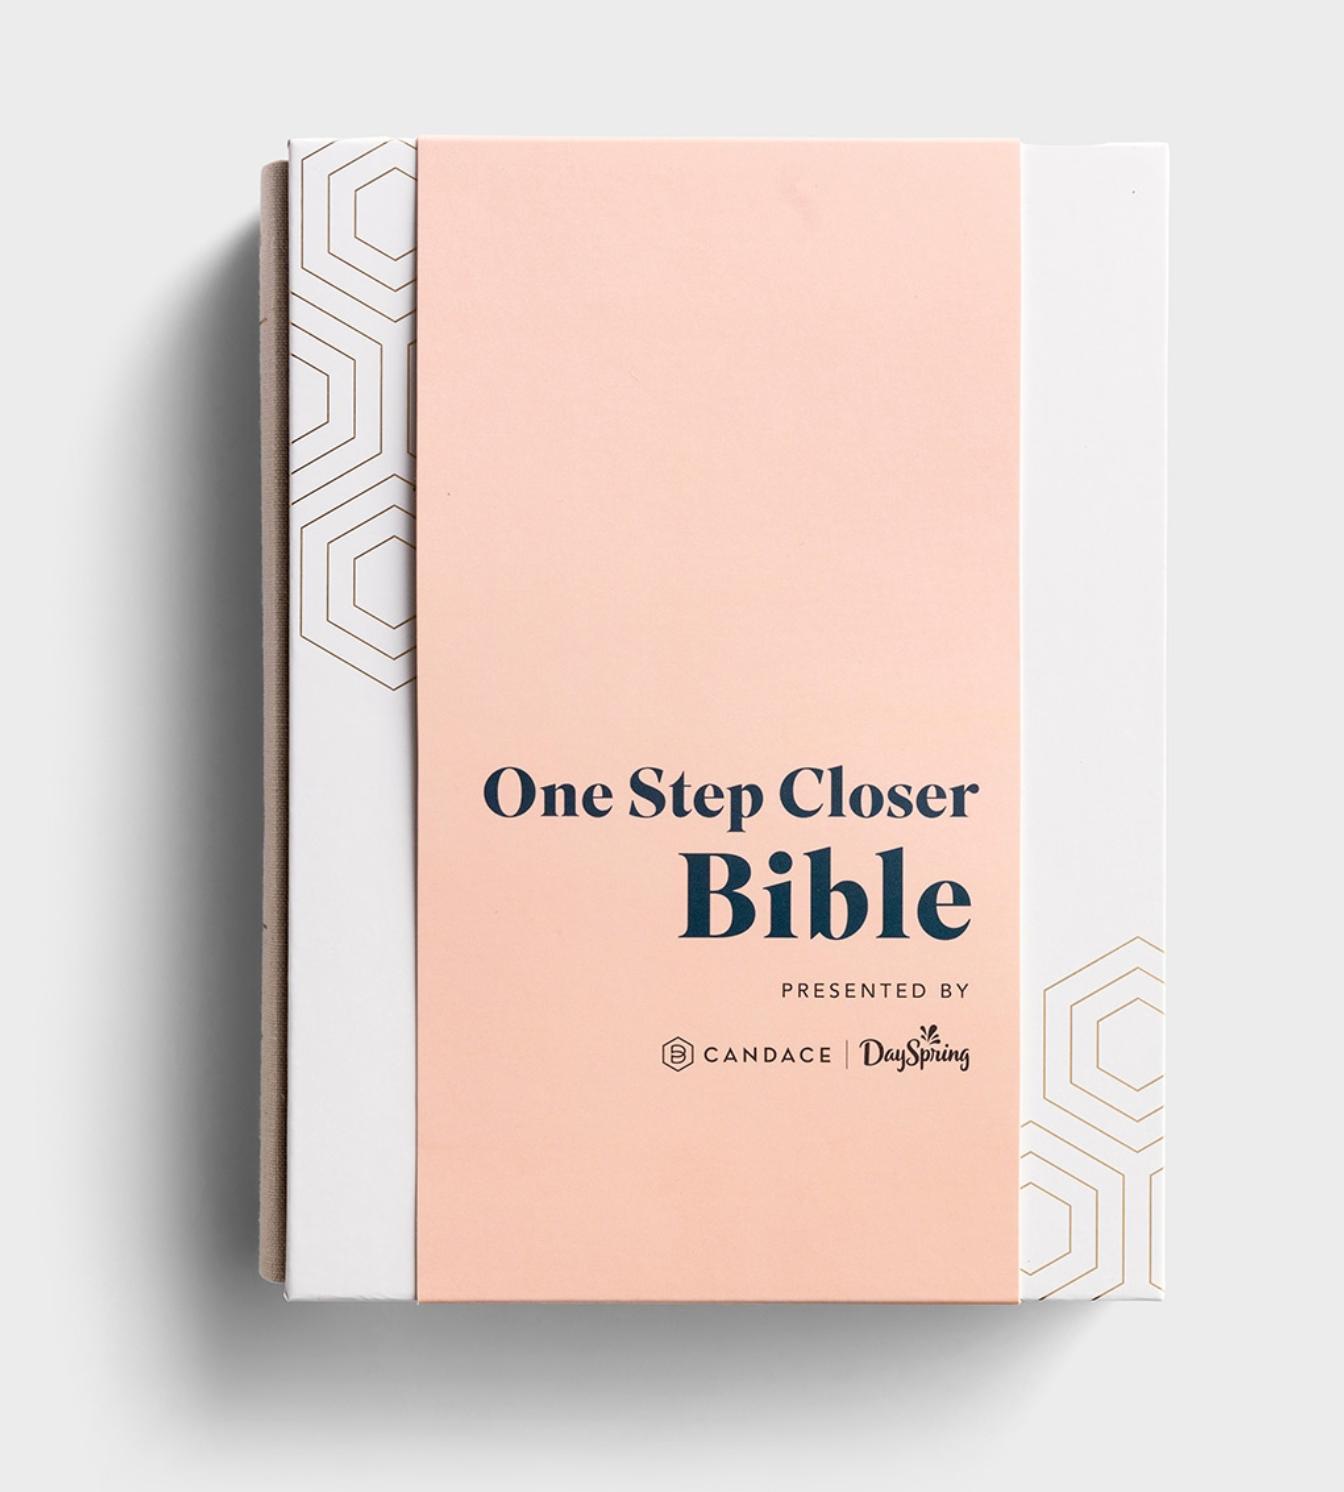 One Step Closer - NLT Bible - Warm Grey Cloth Over Board by Candace Cameron Bure